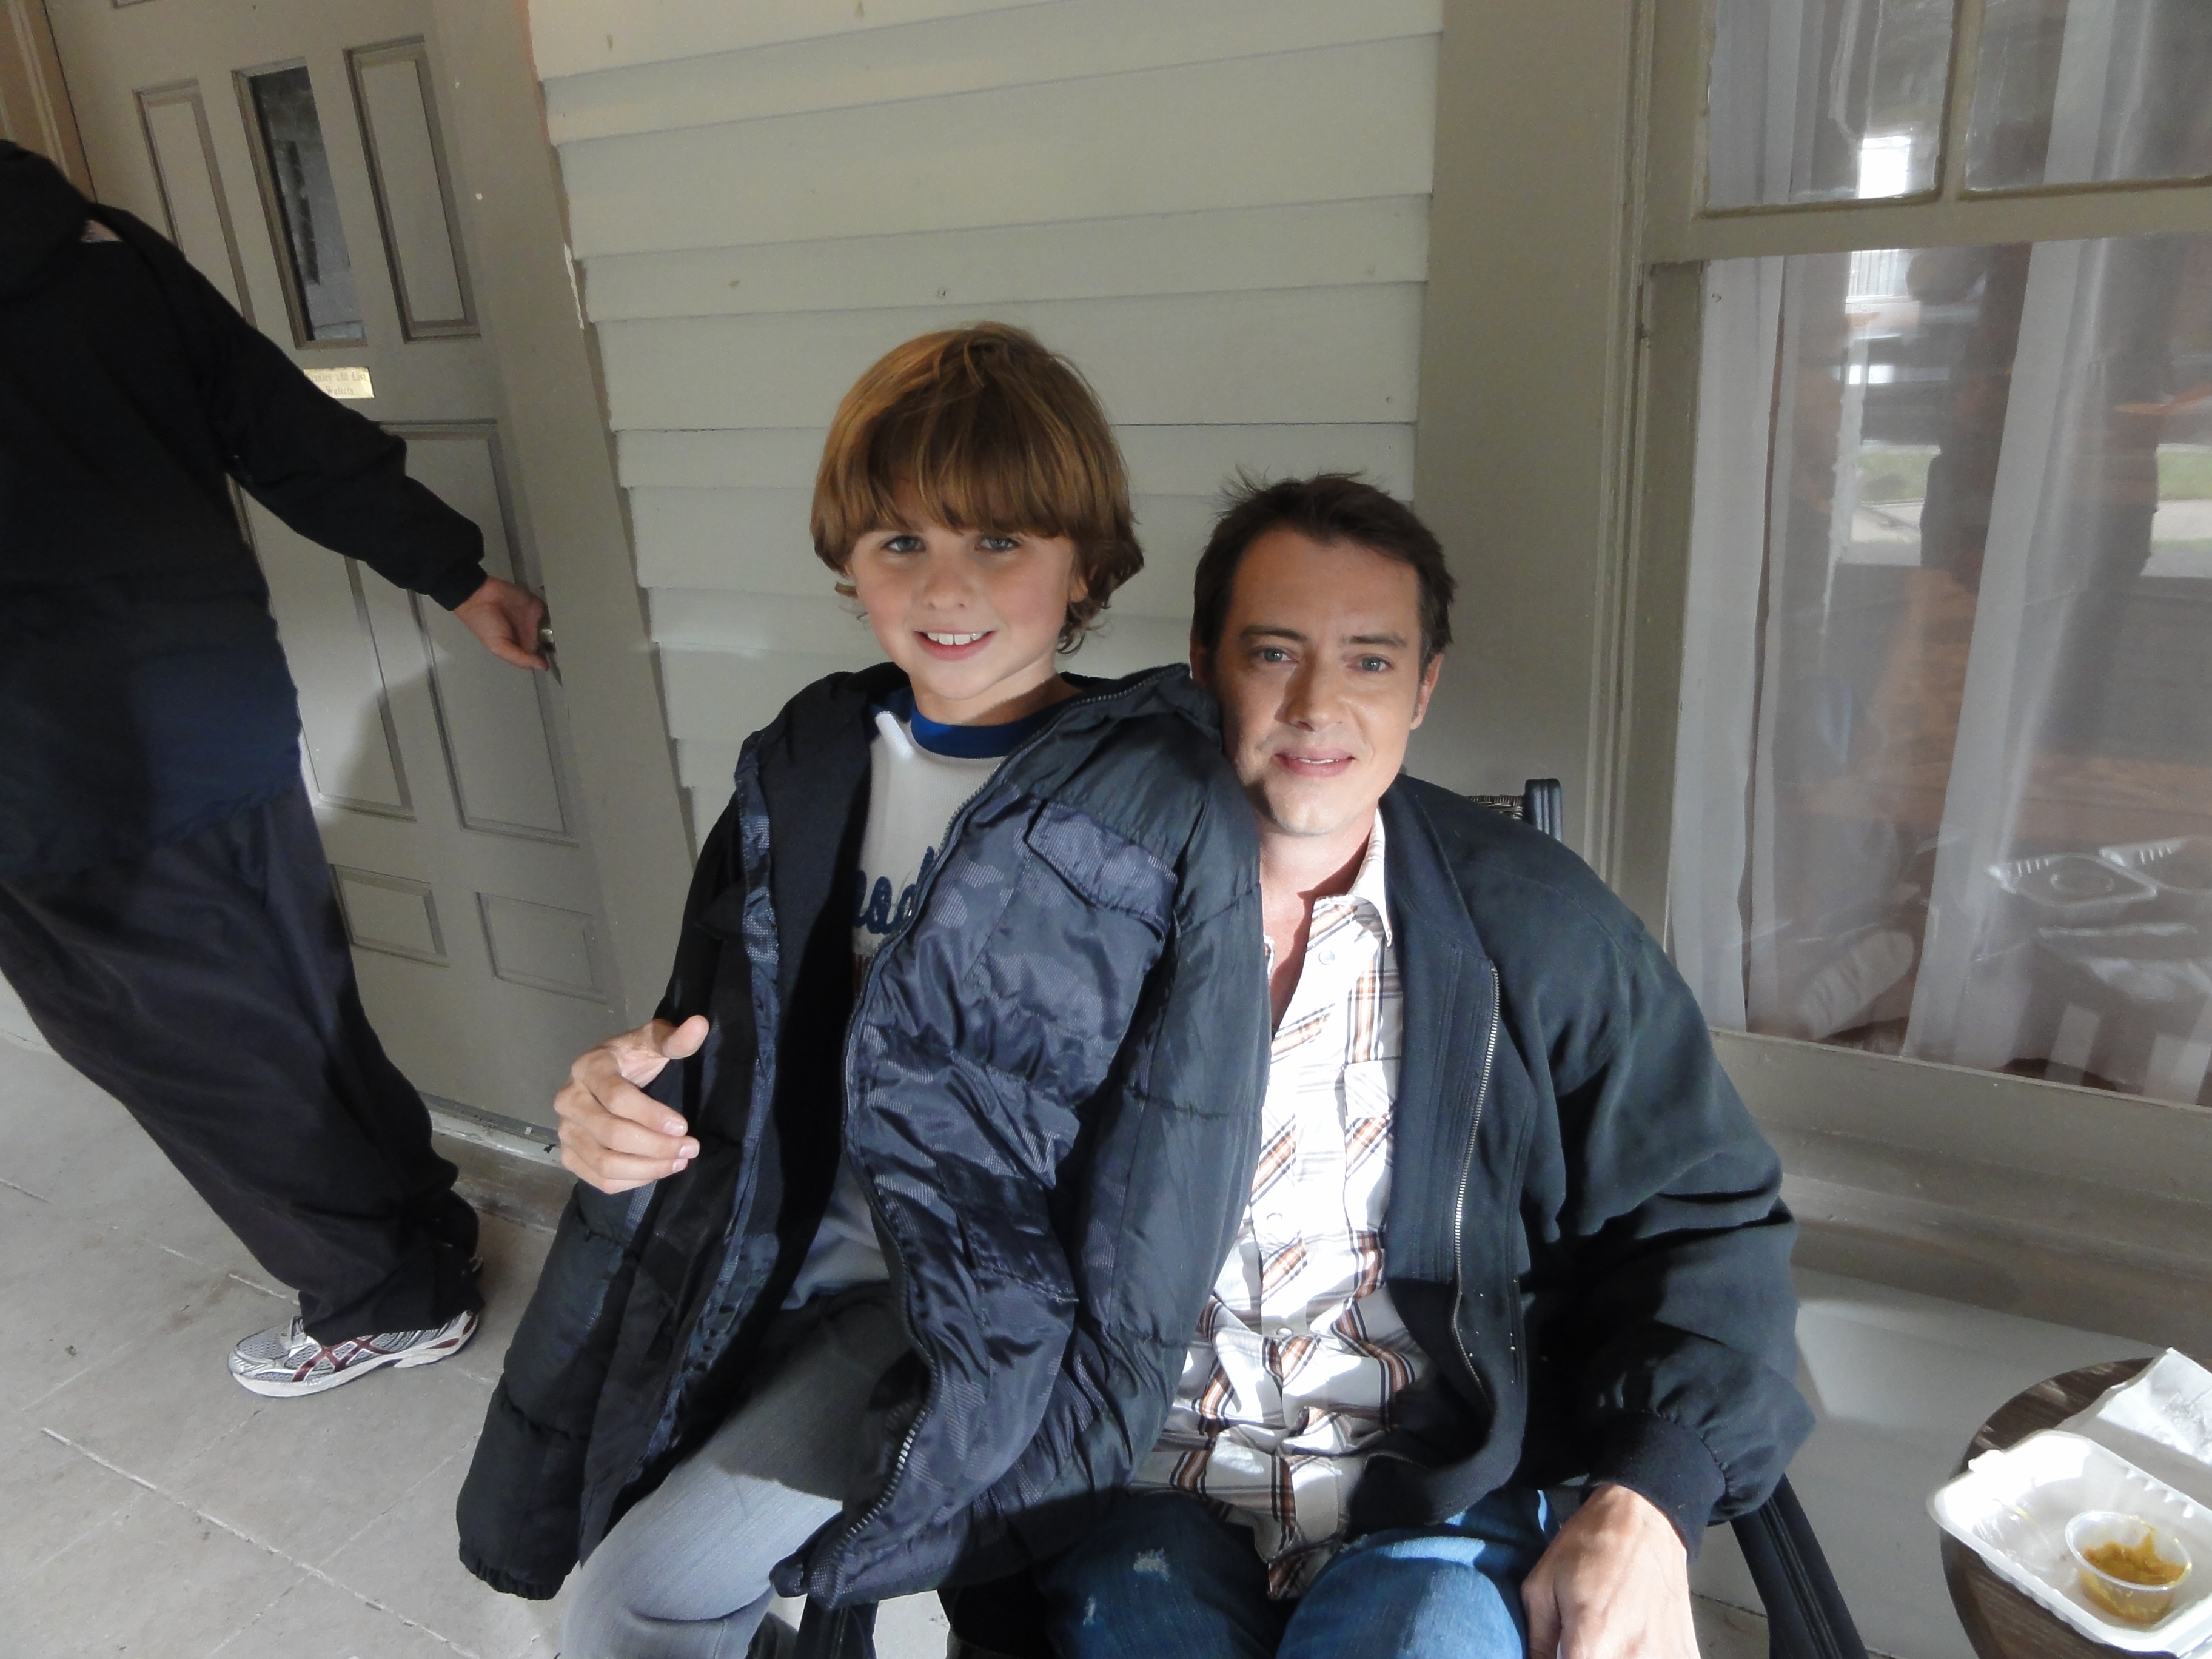 Greyson Moore and Jason London as Eddy and Stanley Walters on the set of The Lamp.